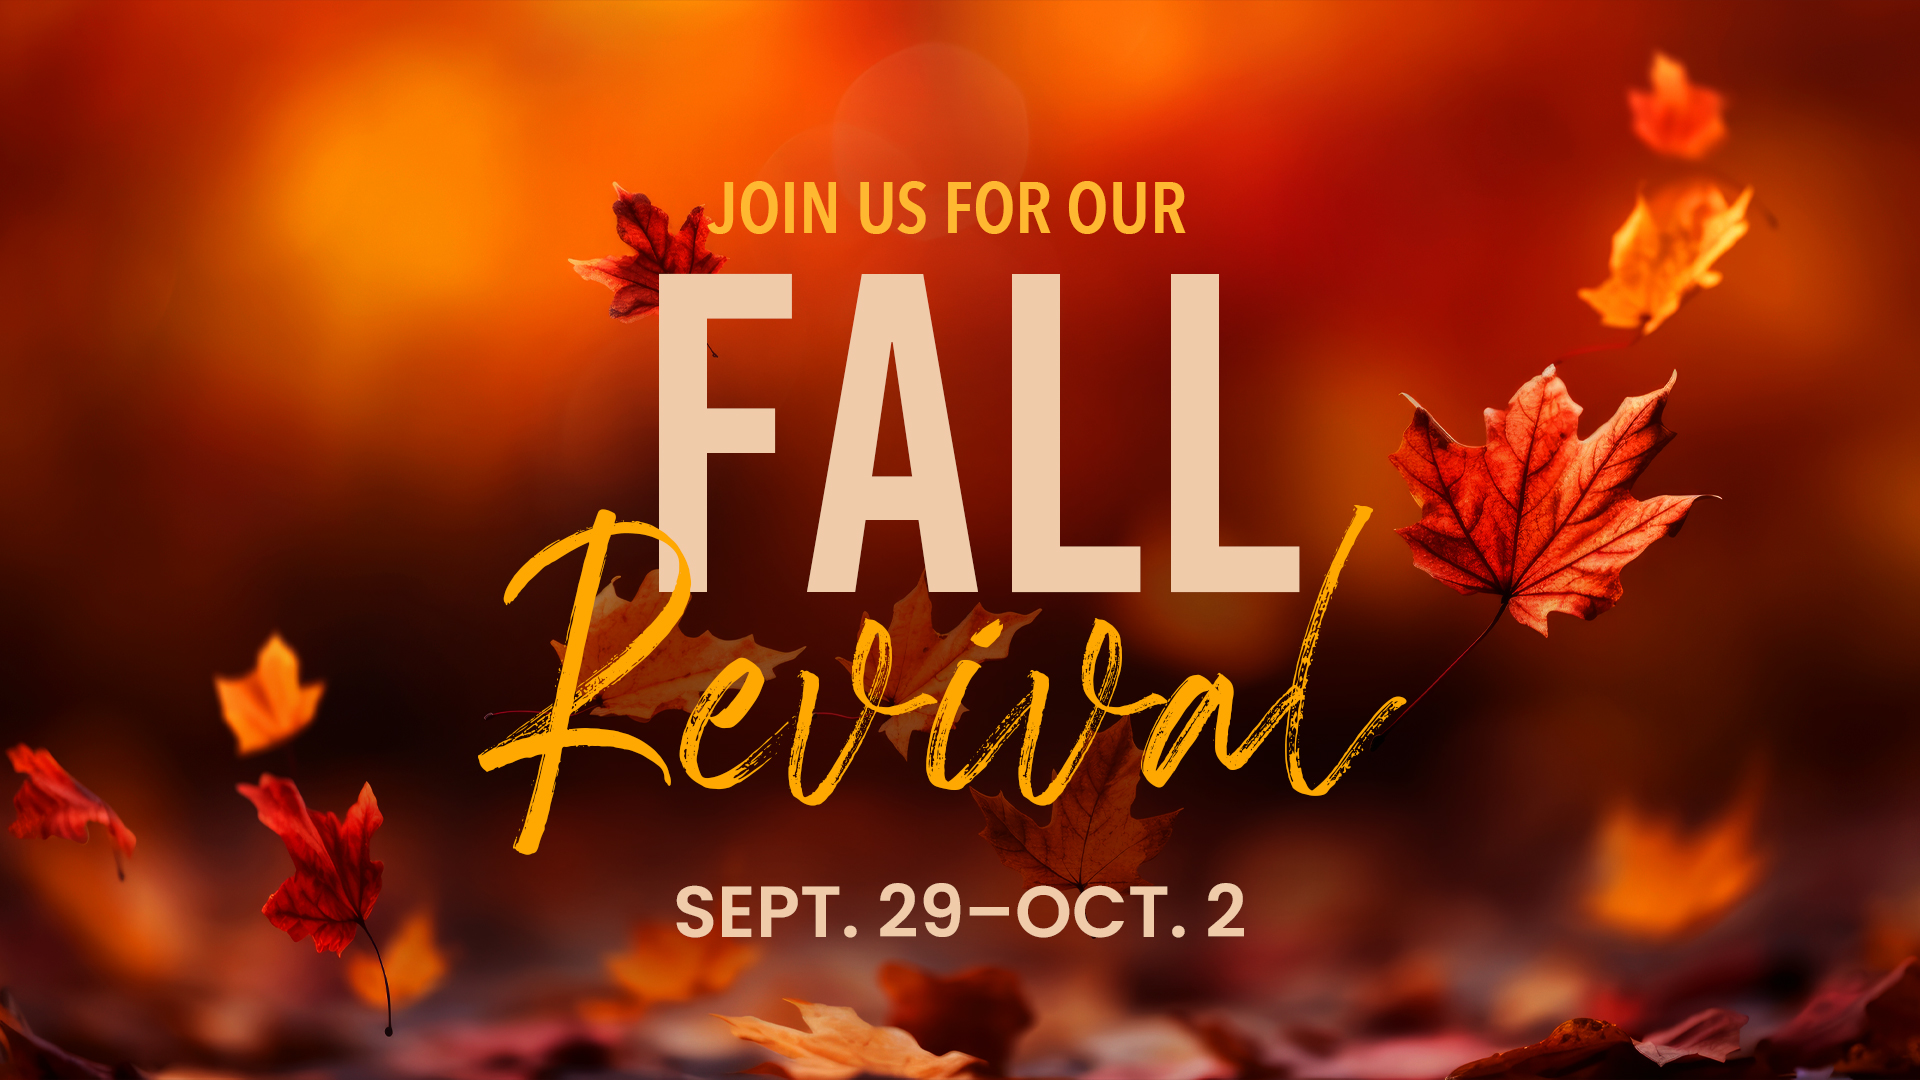 Join us for our Fall Revival, Sept. 29–Oct. 2